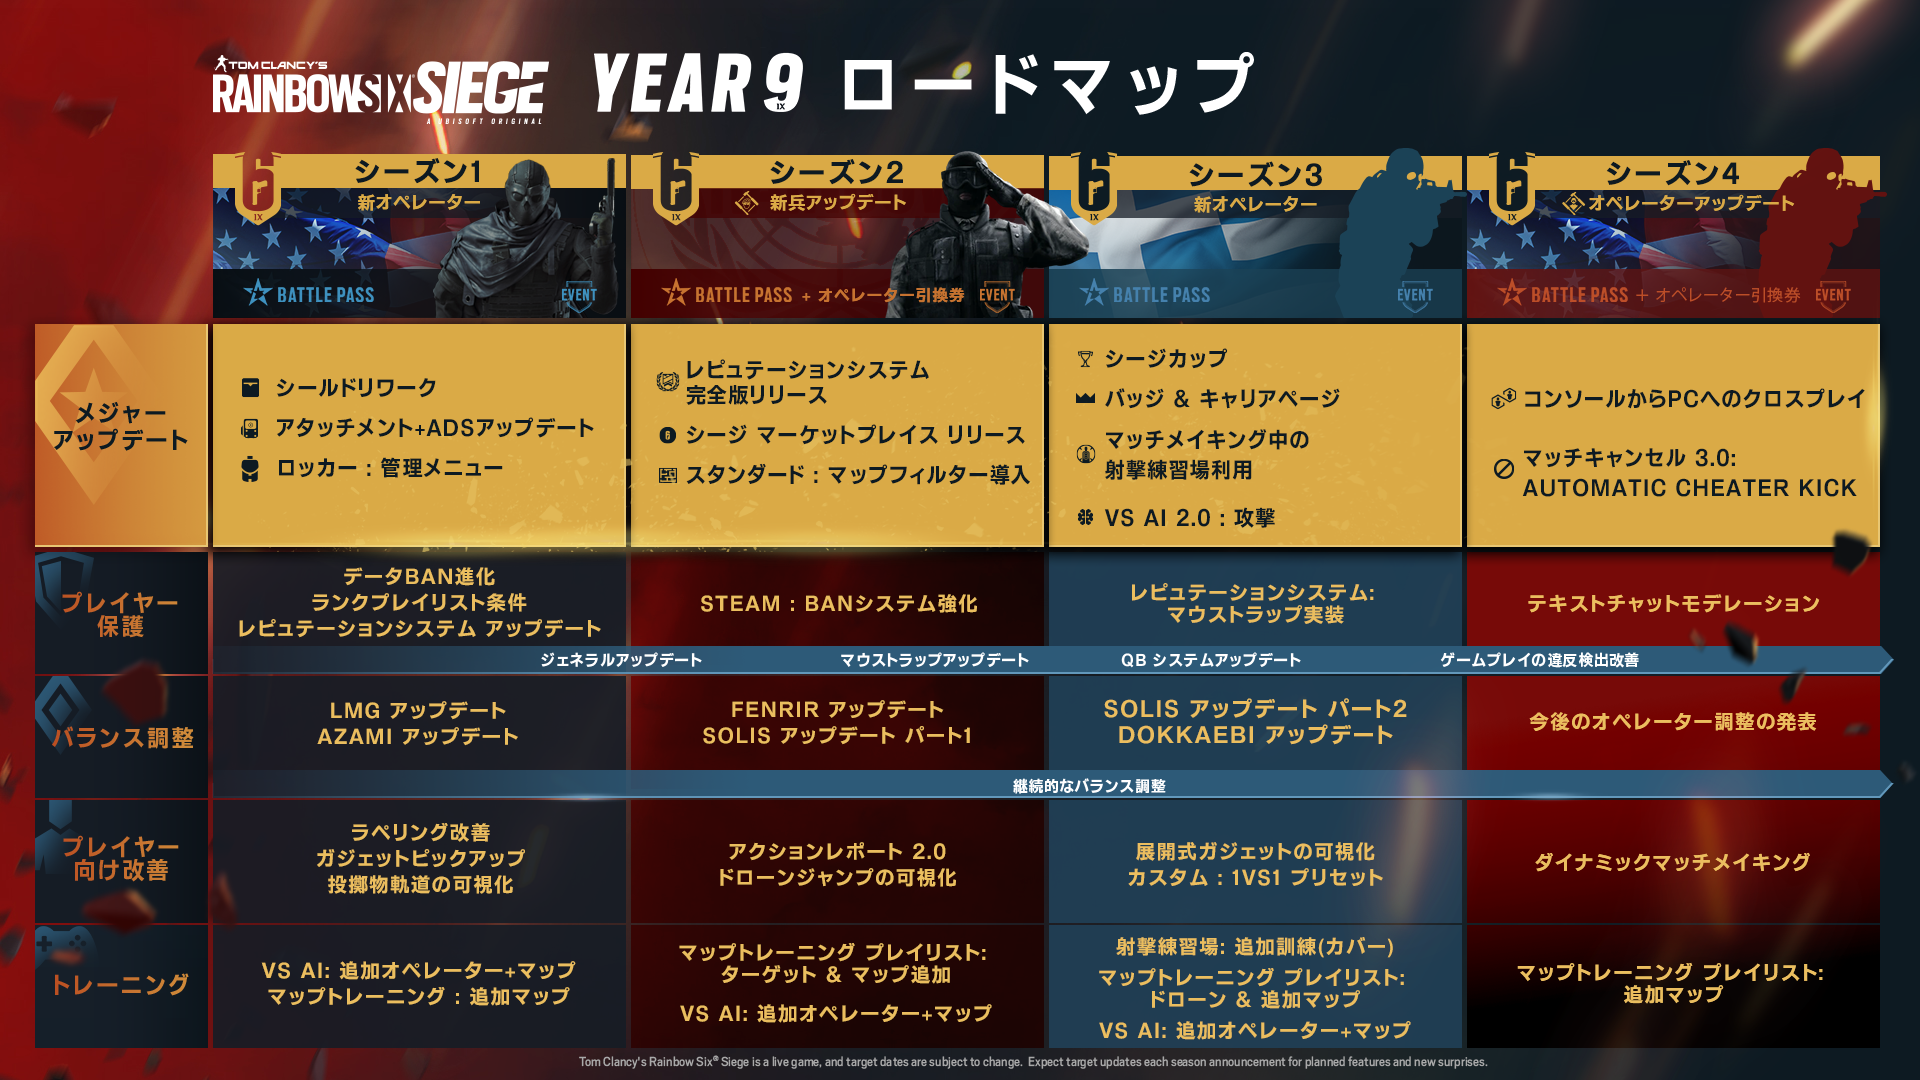 Release of the “Rainbow Six Siege” Year 9 roadmap. Adding new operators, re-mastering, new “SIEGE CUP” system, etc.